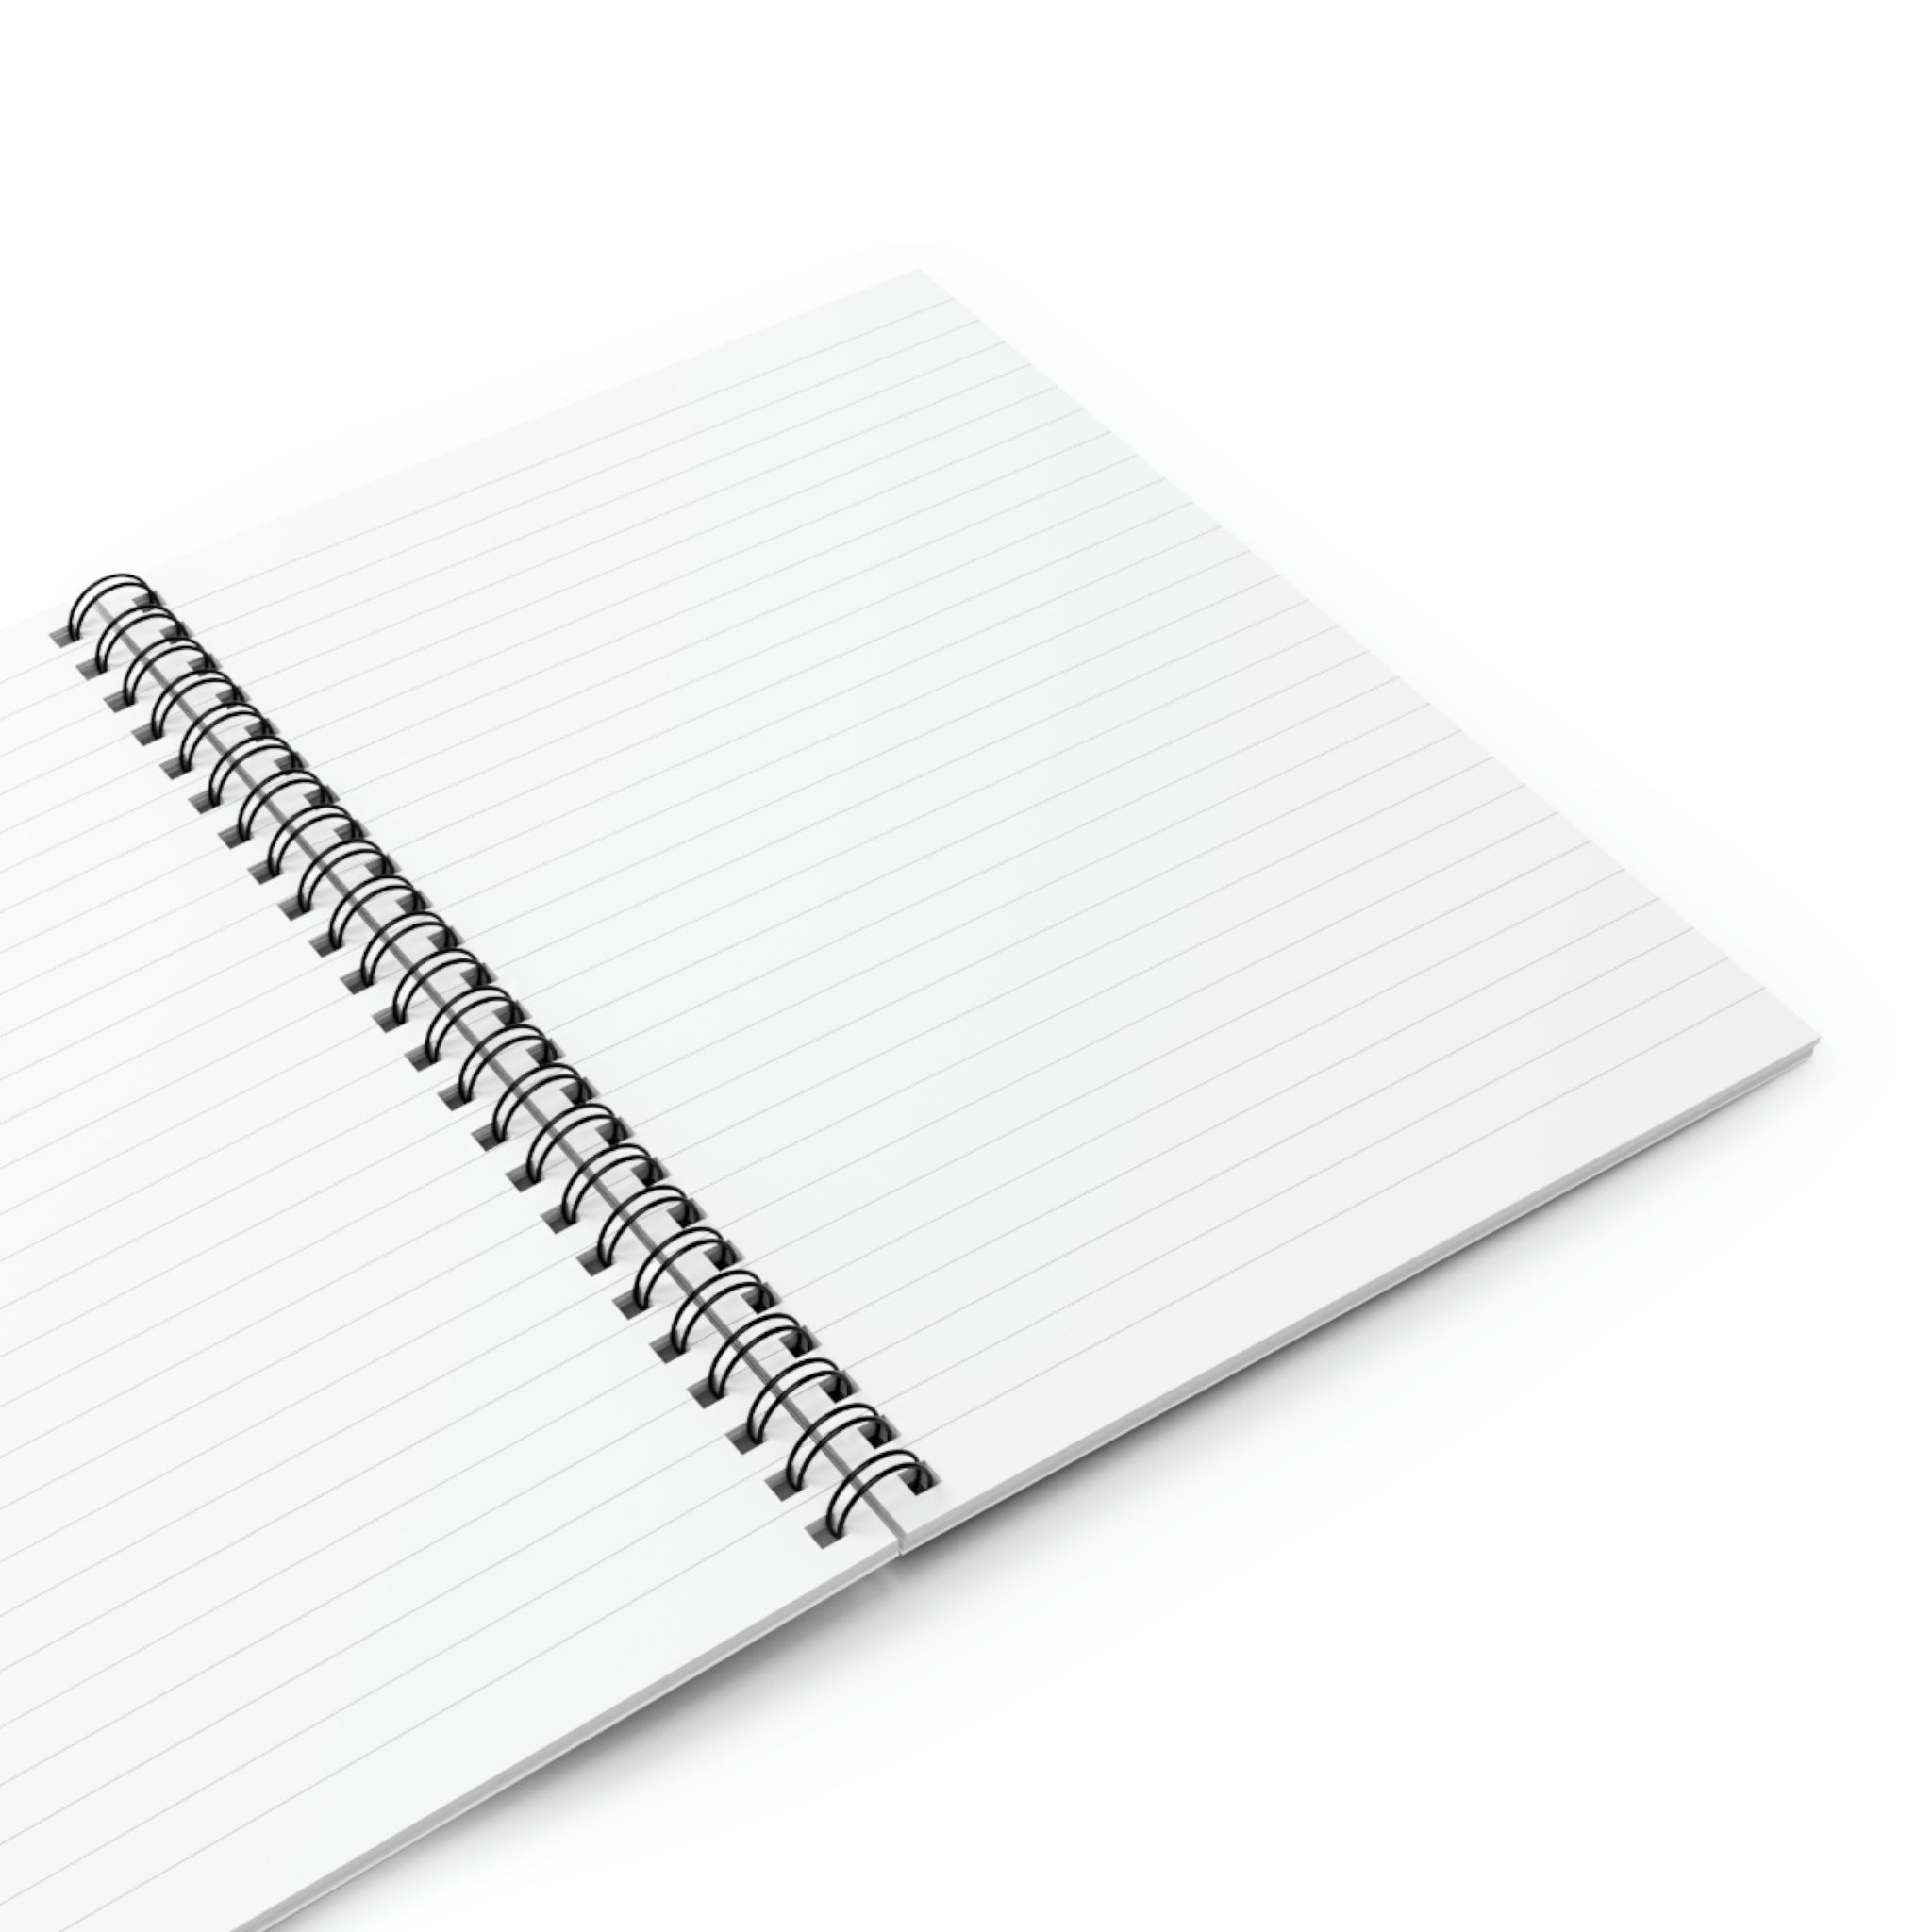 Colts Spiral Notebook - Ruled Line